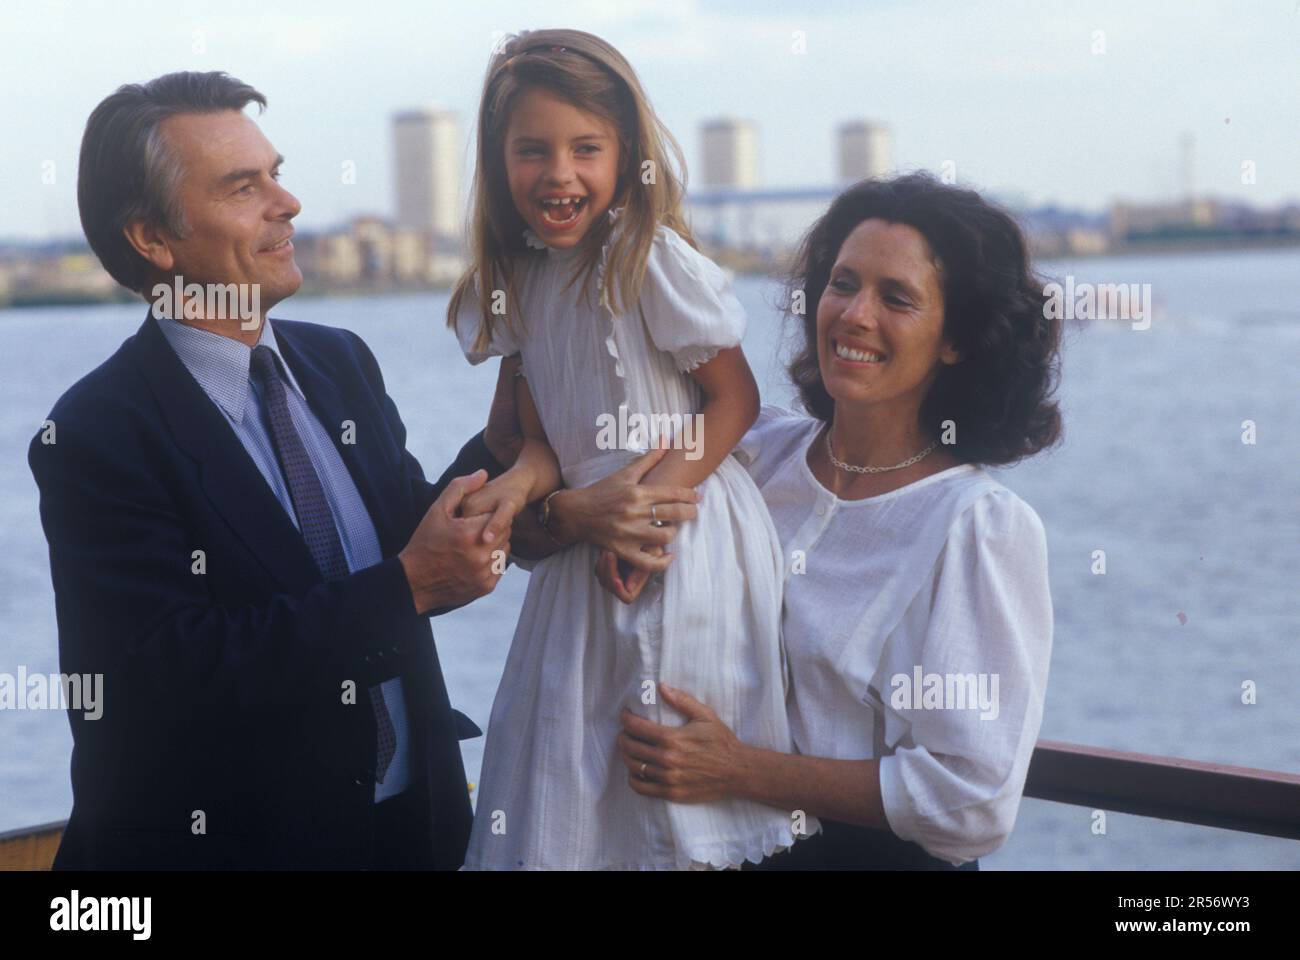 David Owen MP (Lord Owen) with daughter Lucy and wife Debbie. British Politician 1980s England. In their Narrow Street, Wapping east London apartment, with view across the river Thames. HOMER SYKES Stock Photo